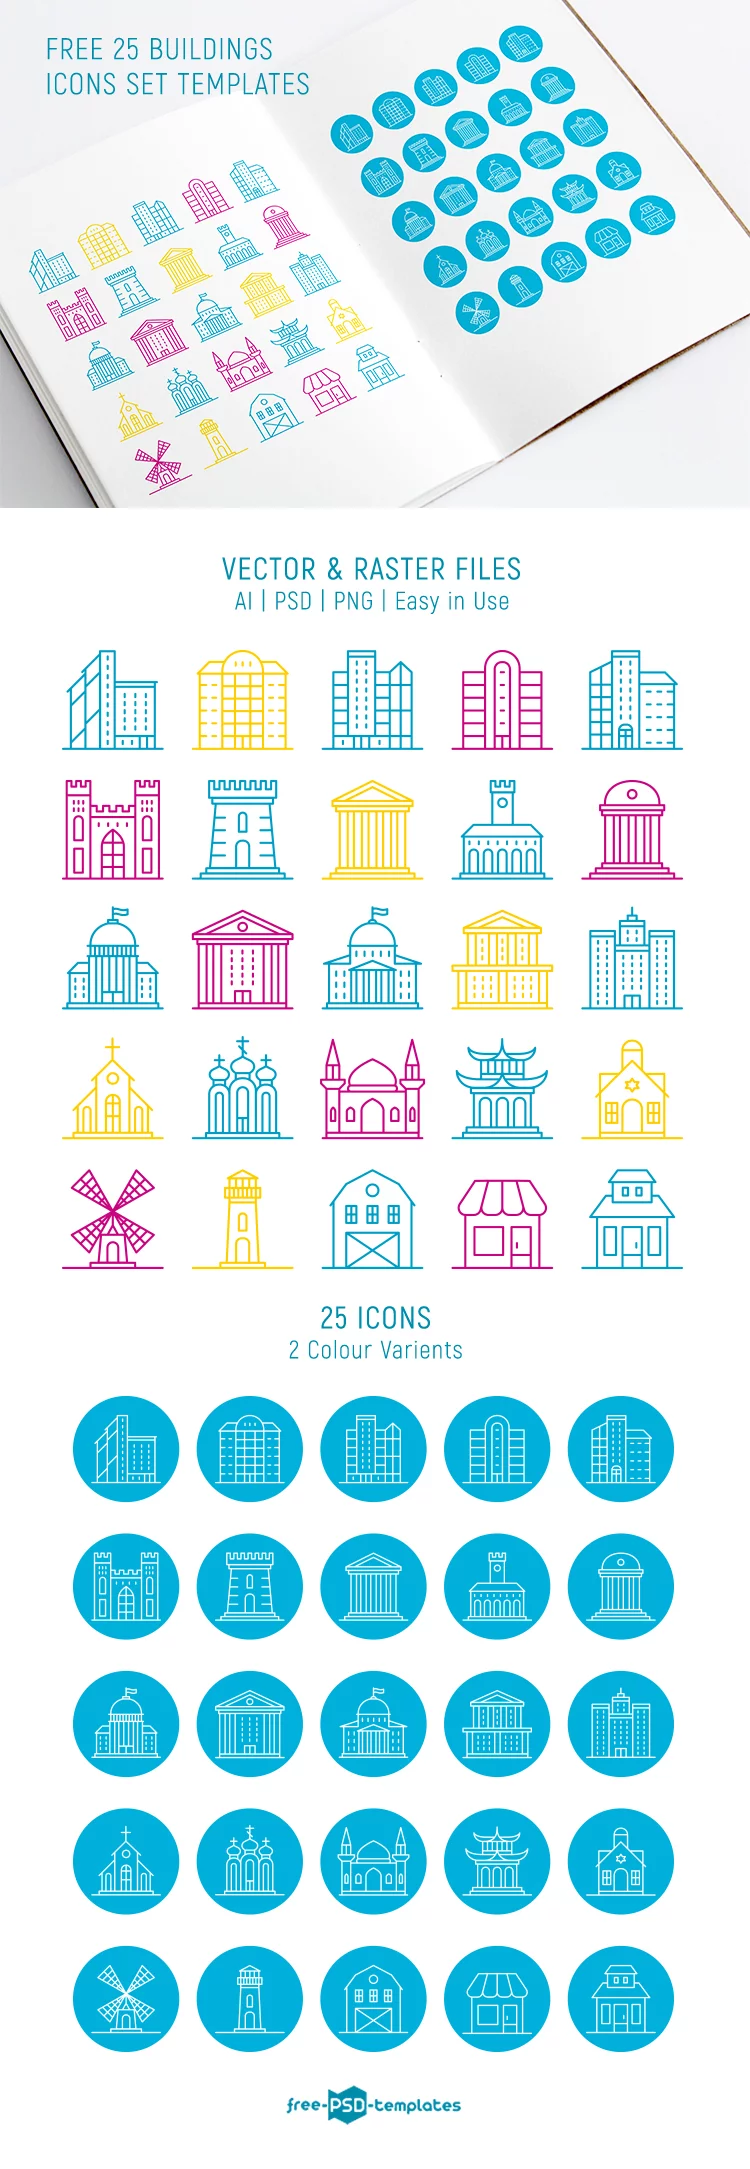 Free 25 Buildings Icons Set Templates